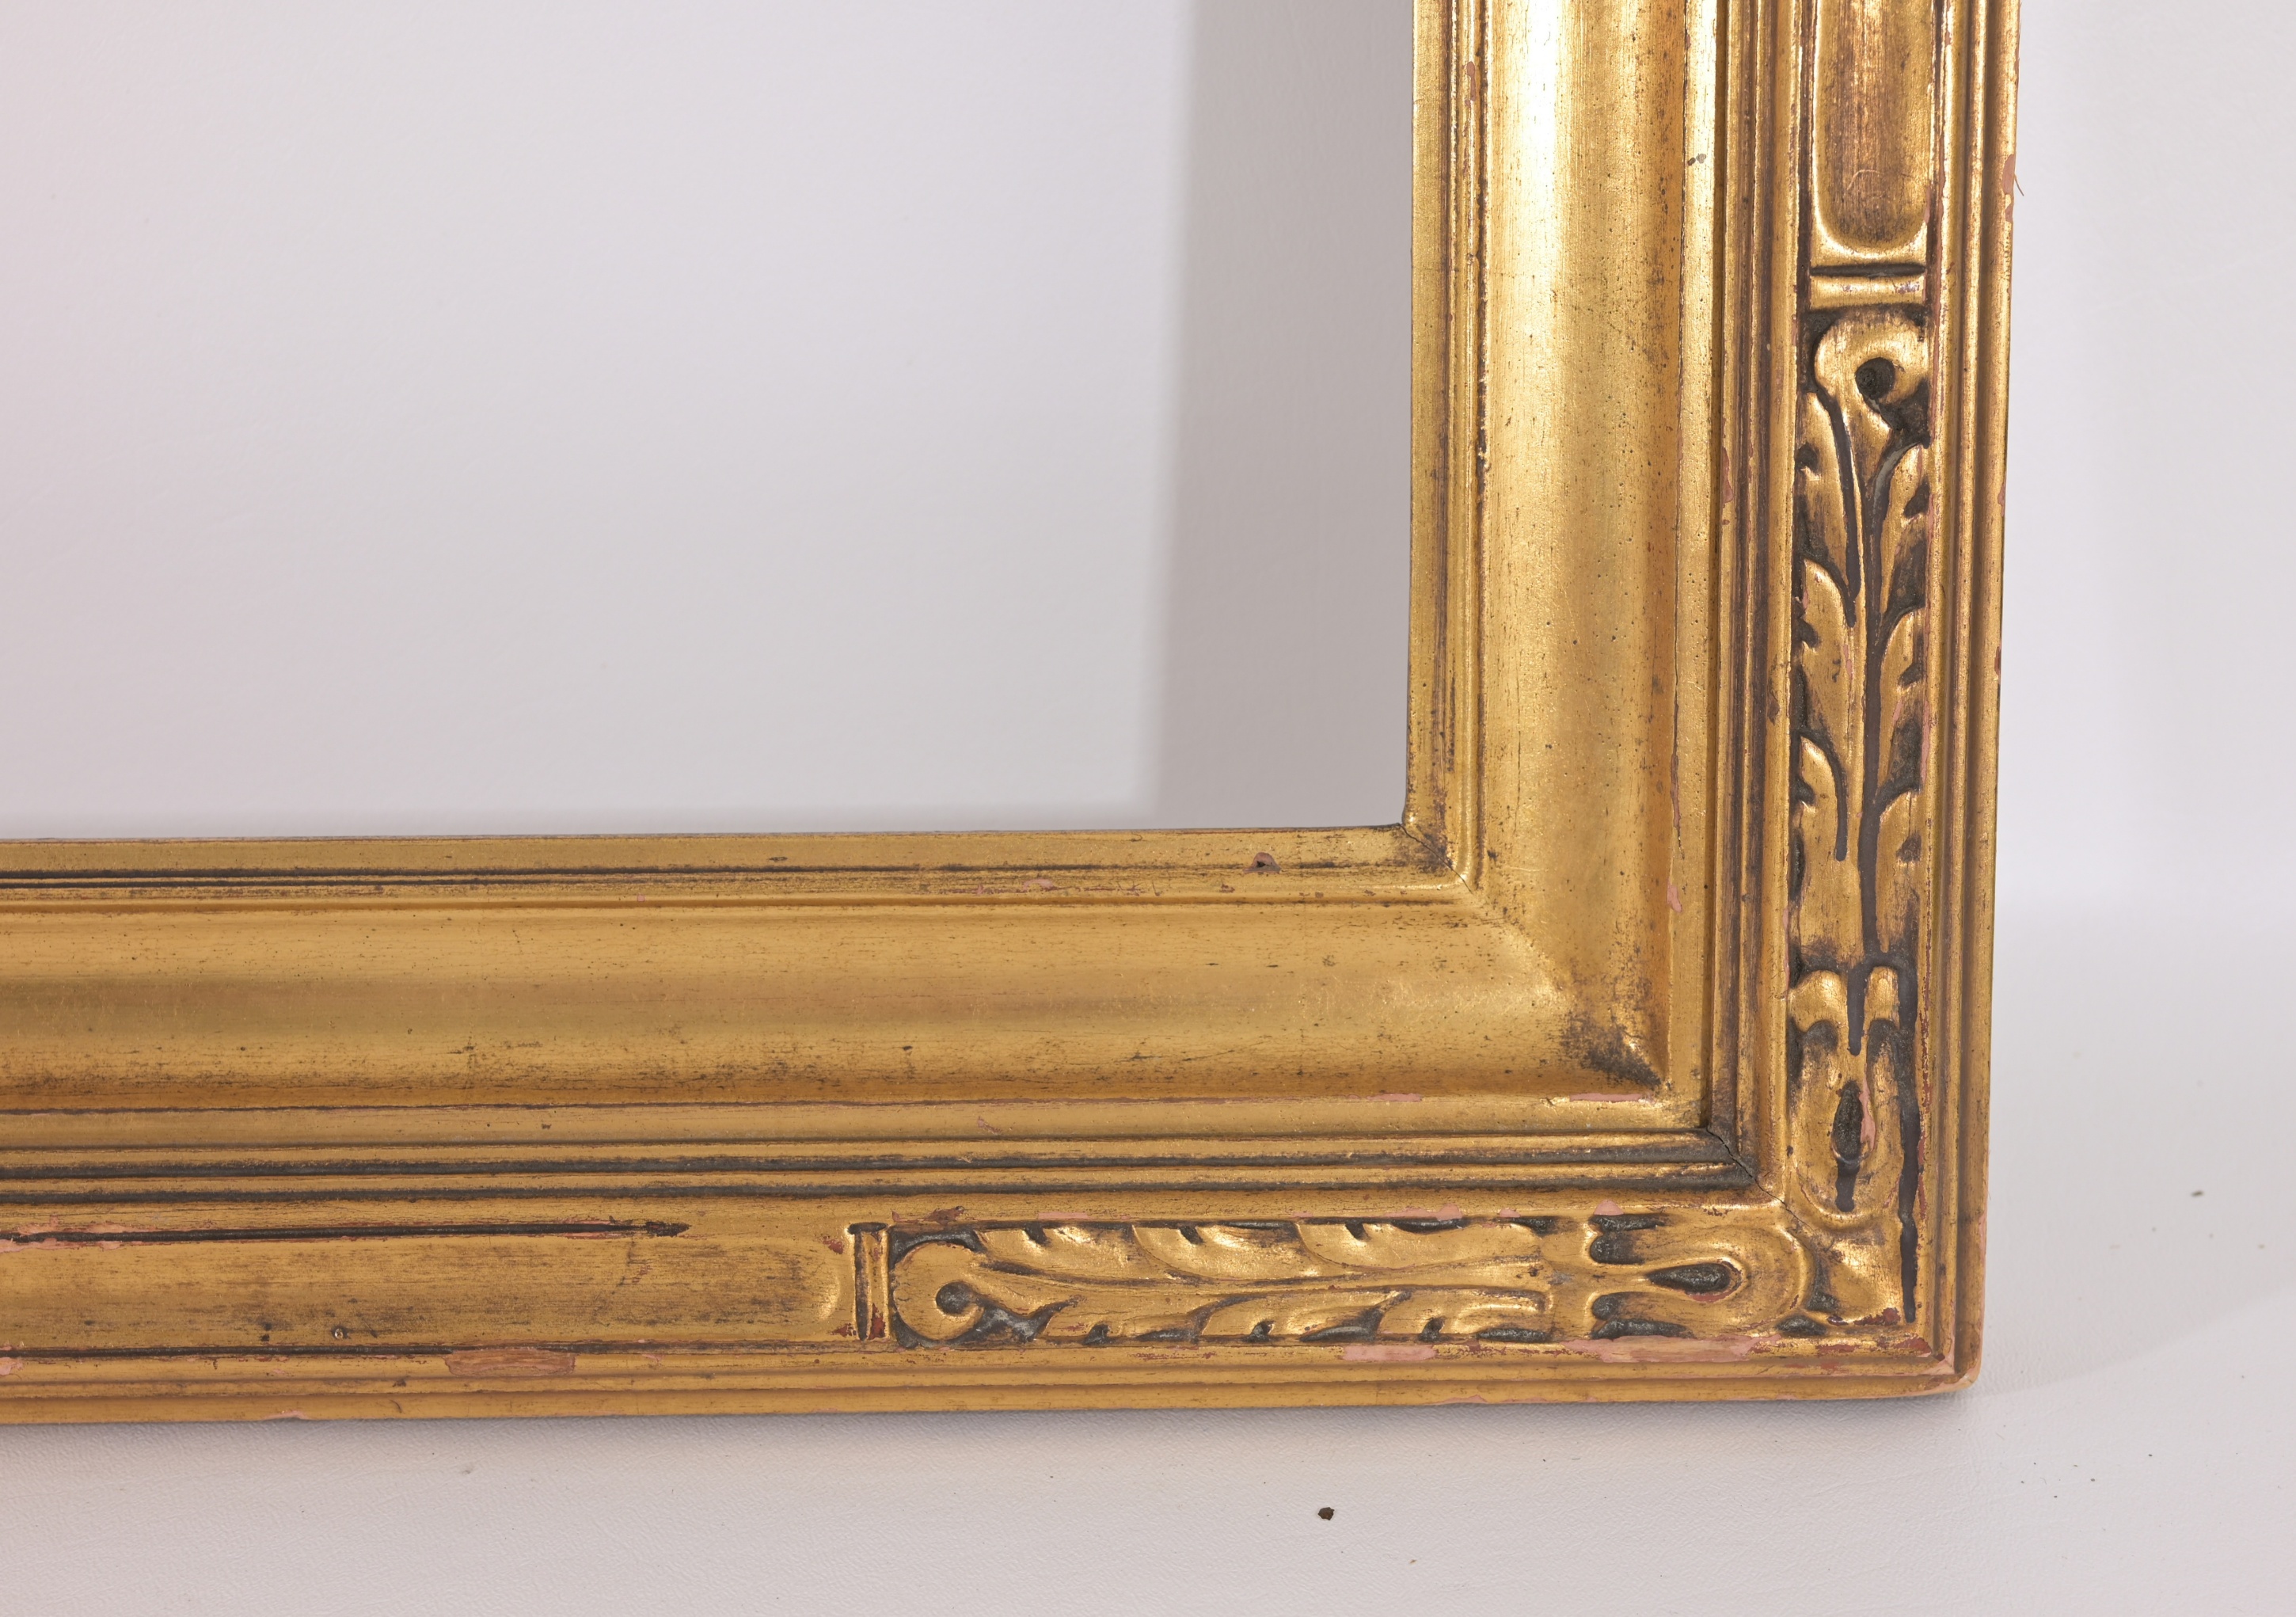 Early 20th C. American Gilt Frame - Image 2 of 5